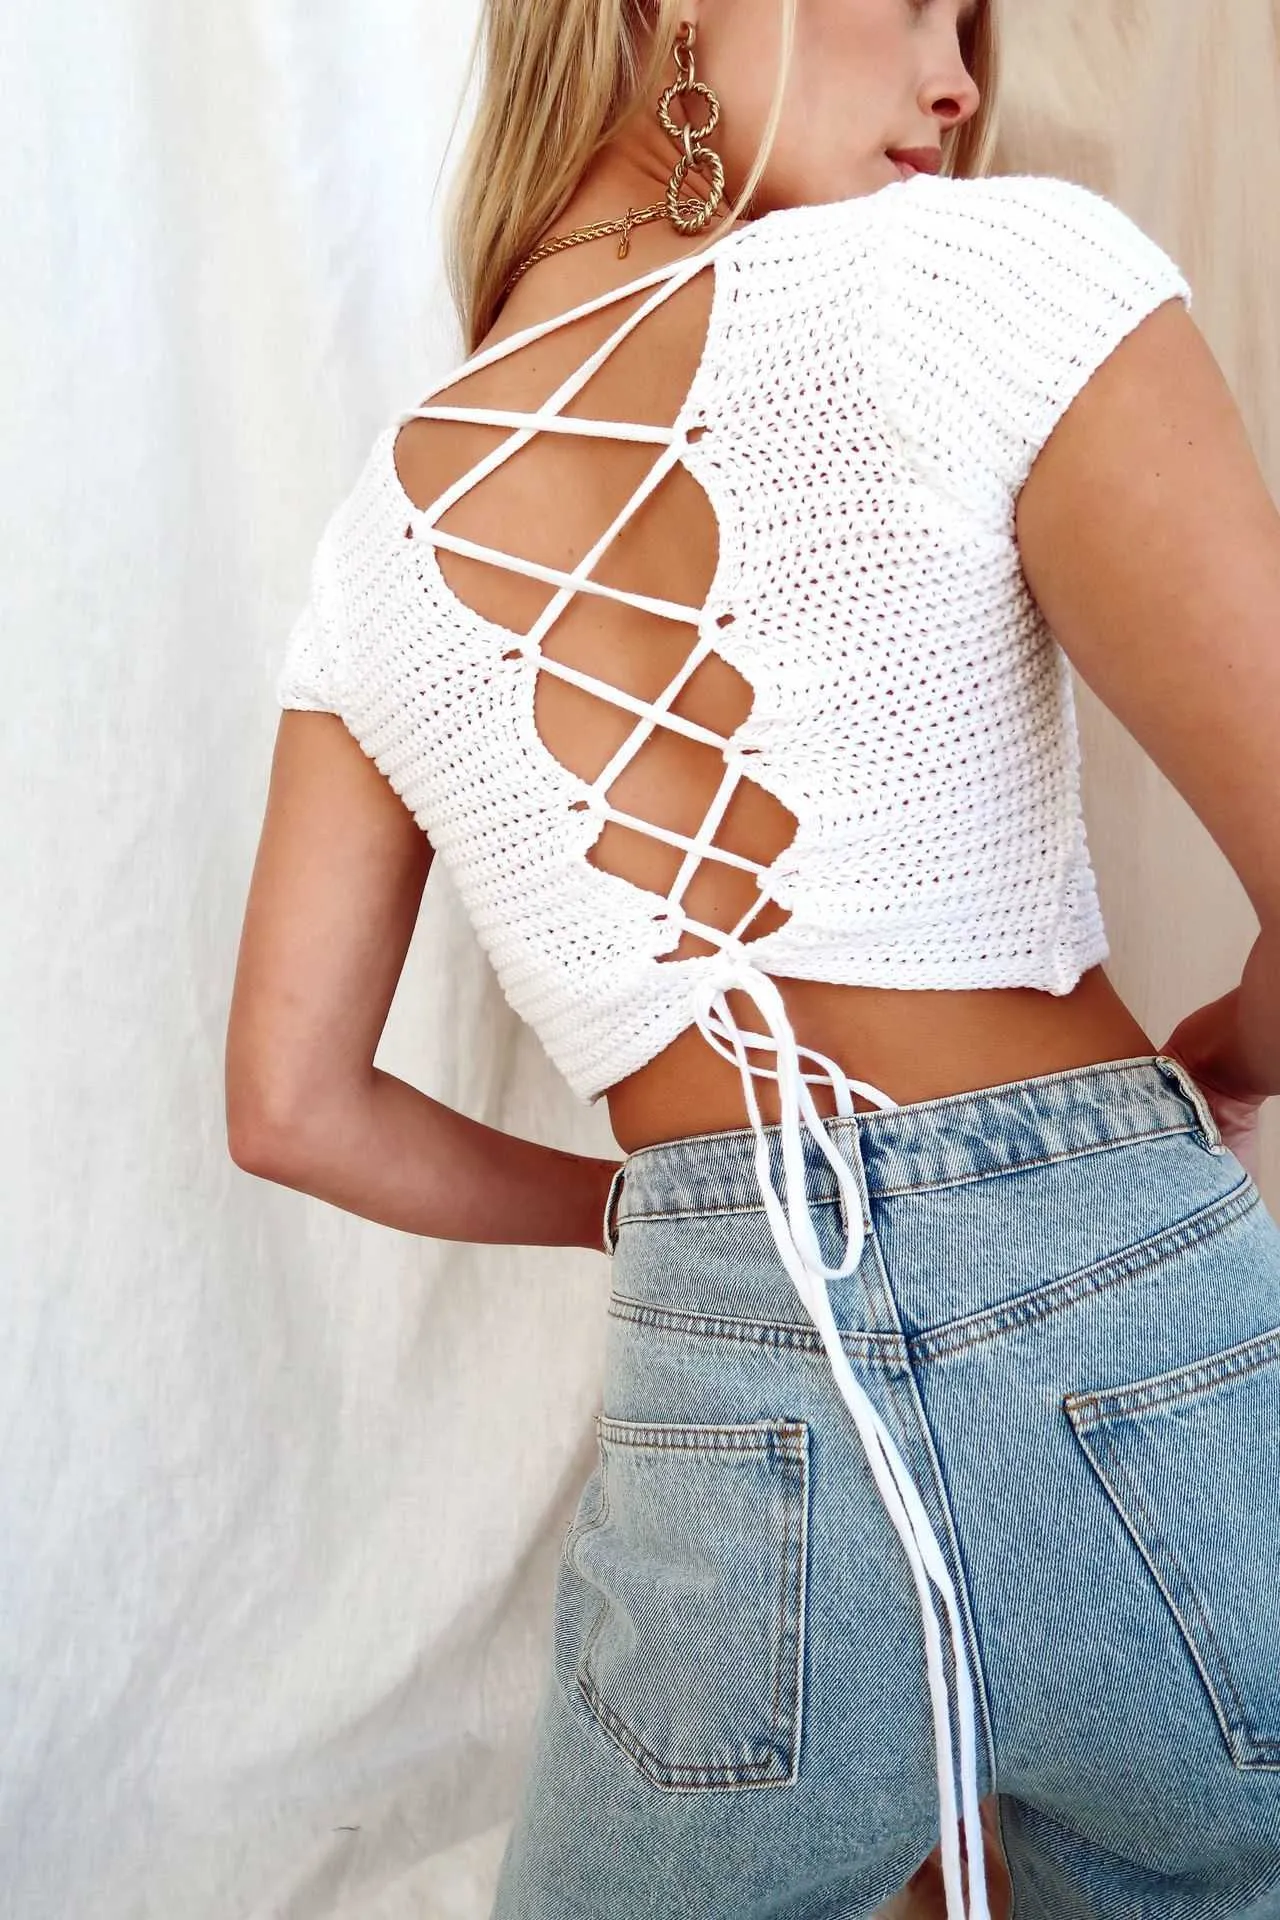 Women's Crop Top Knitted Vest 100% Cotton Summer Sexy Hollow Out Lacing Backless Cropped Tanks White Black Plain Y0824